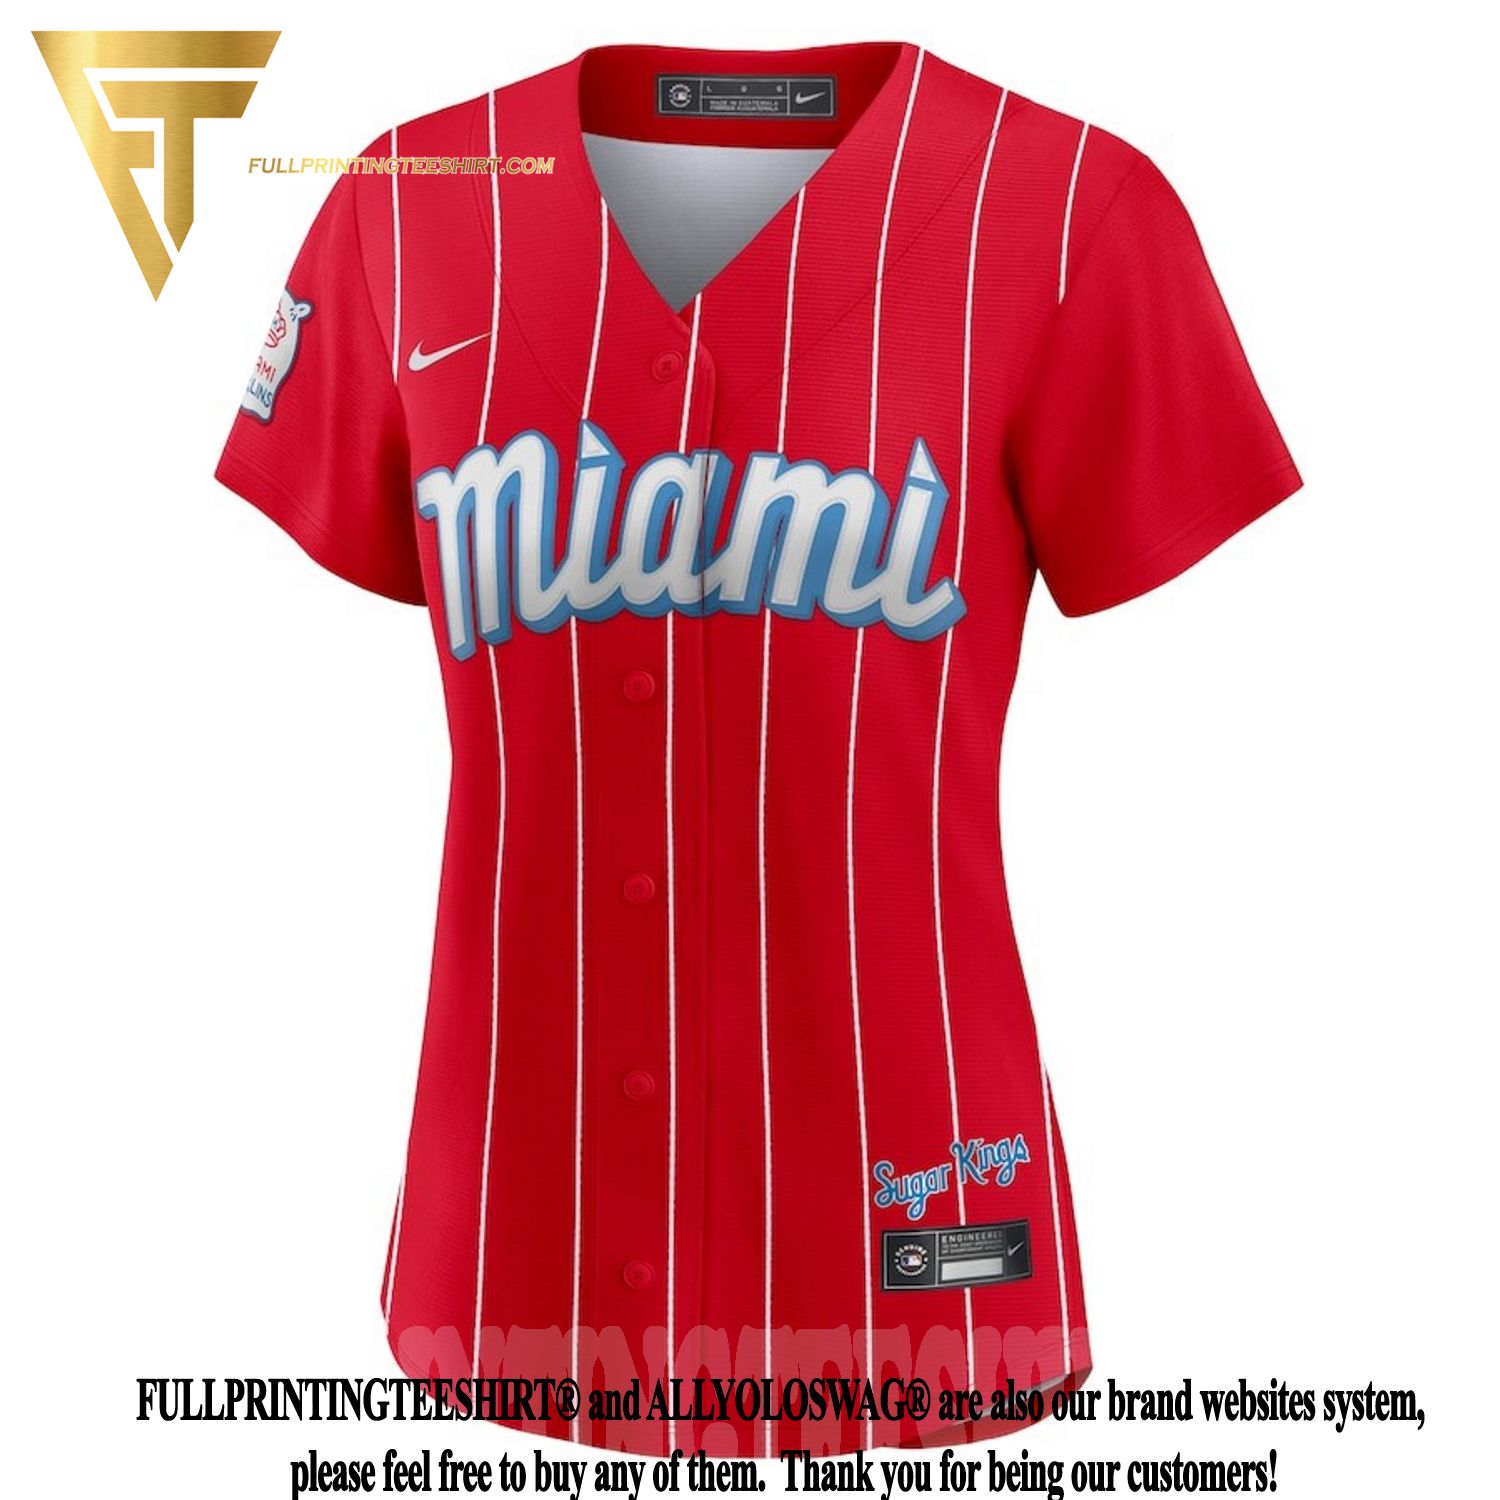 2021 City Connect Baseball Miami-Marlins Red Custom Player